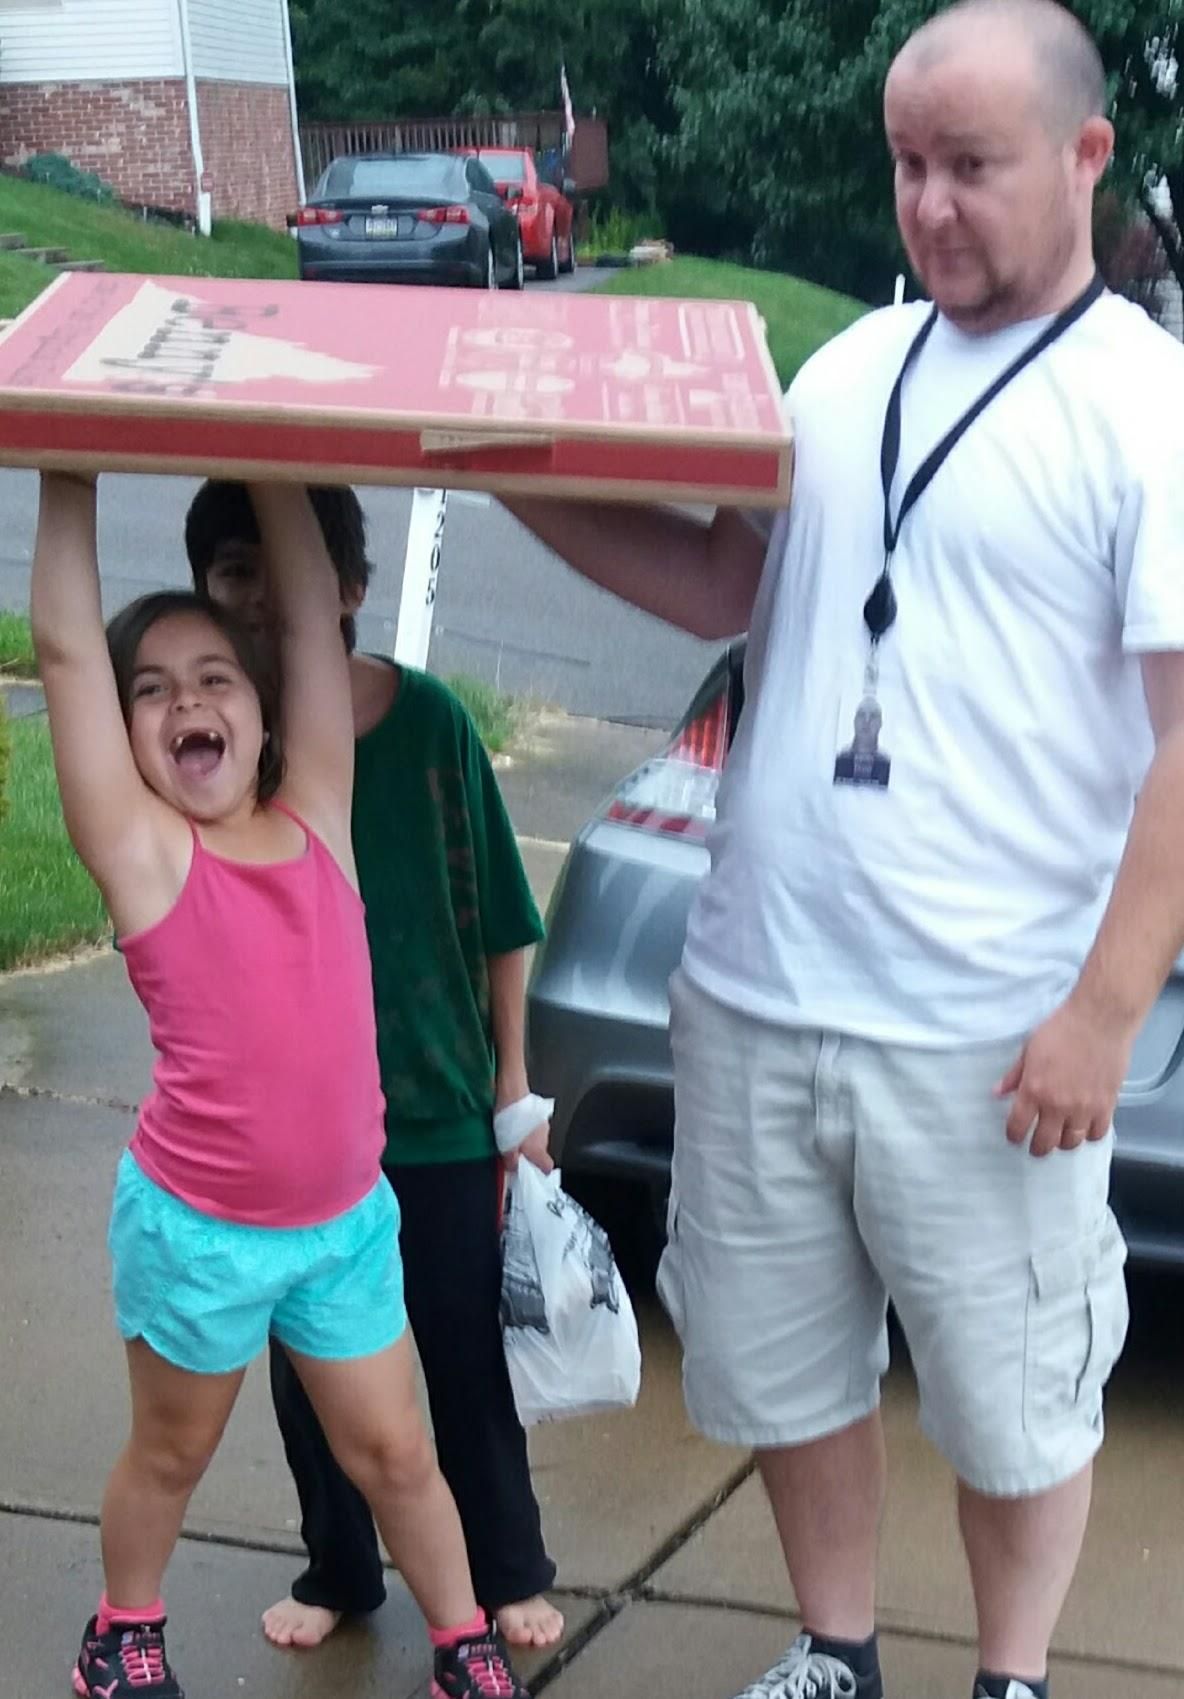 May something in life make you as excited as this giant pizza once made my daughter.